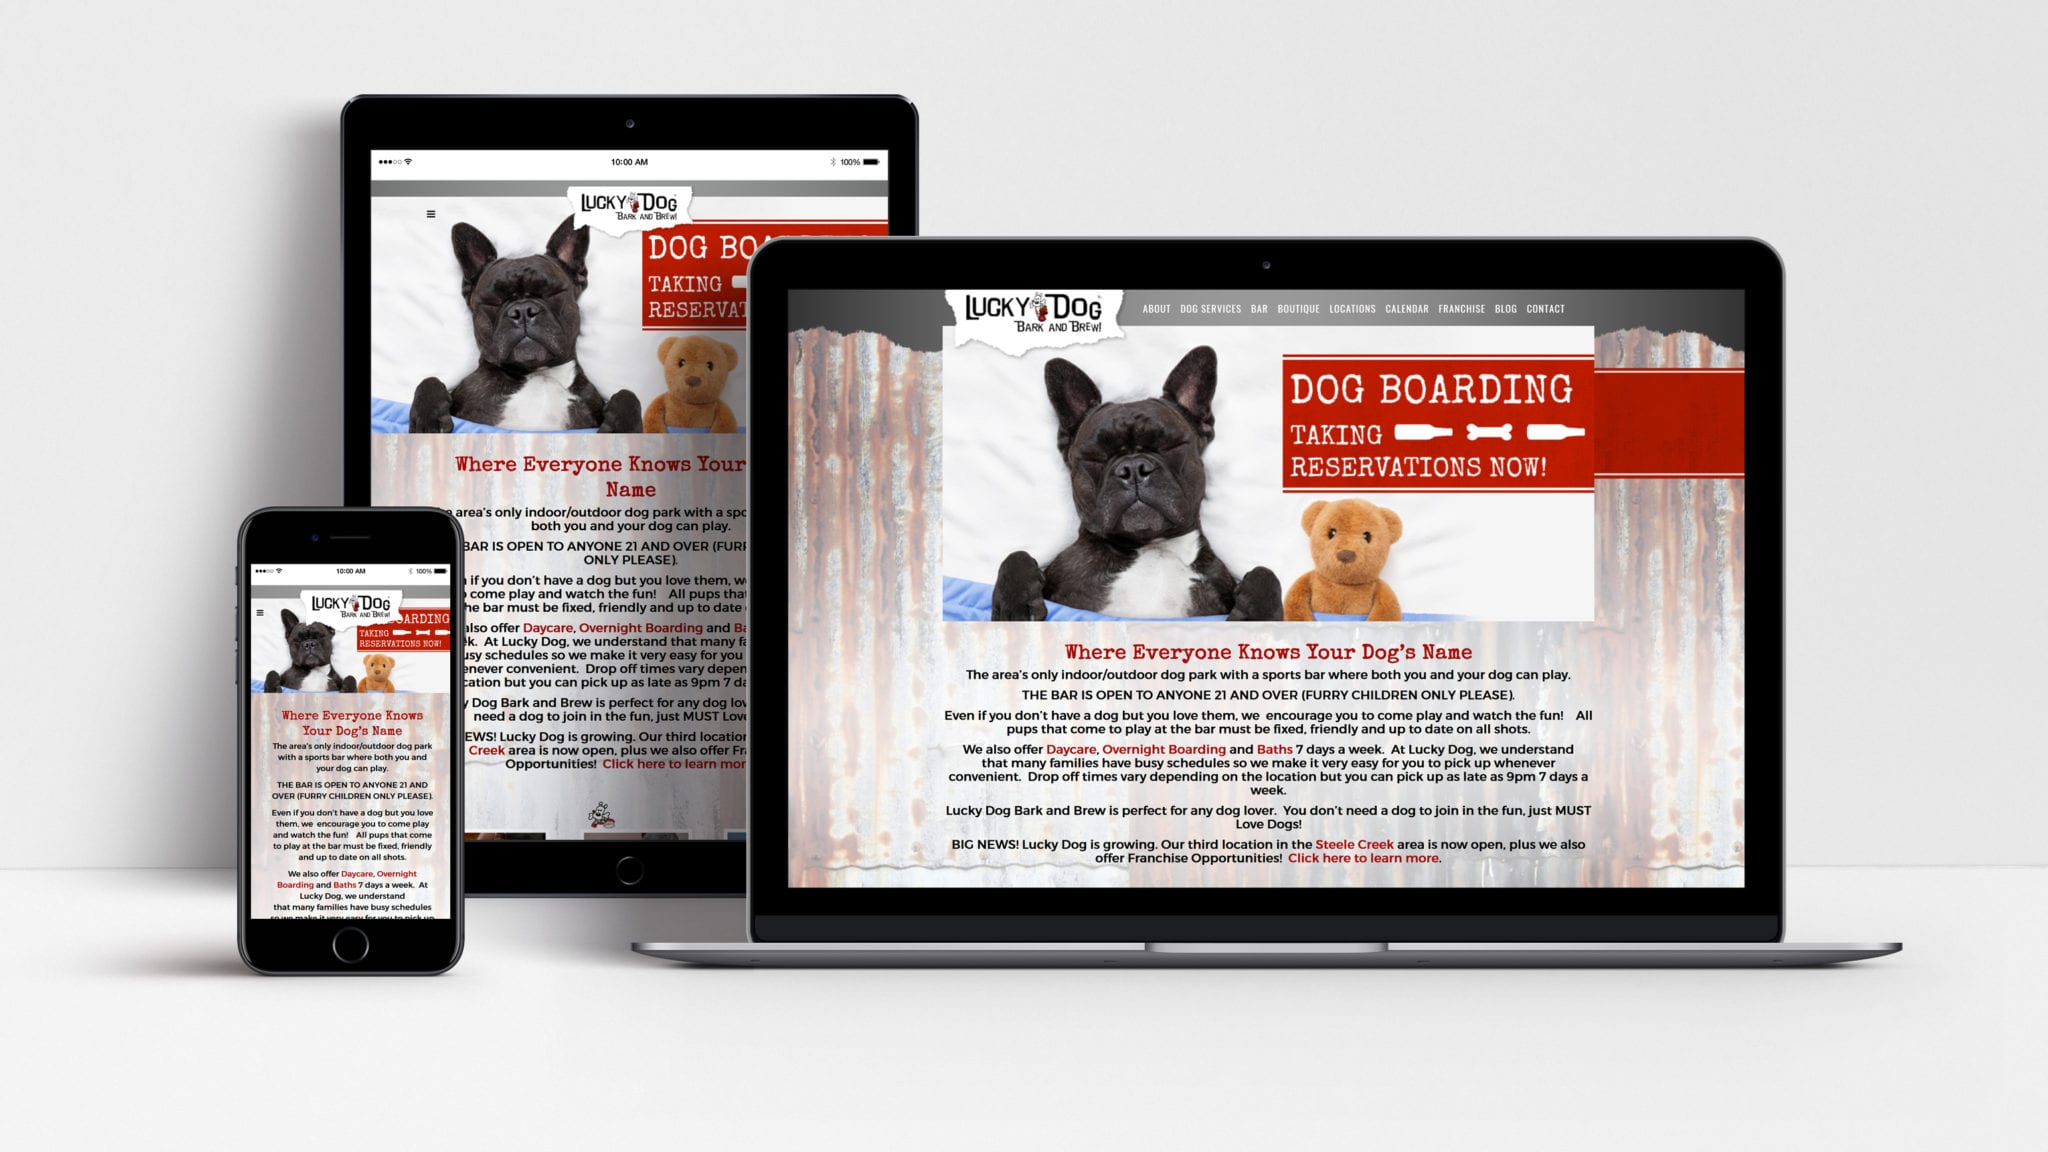 Lucky Dog Bark & Brew website shown on laptop, tablet and mobile phone